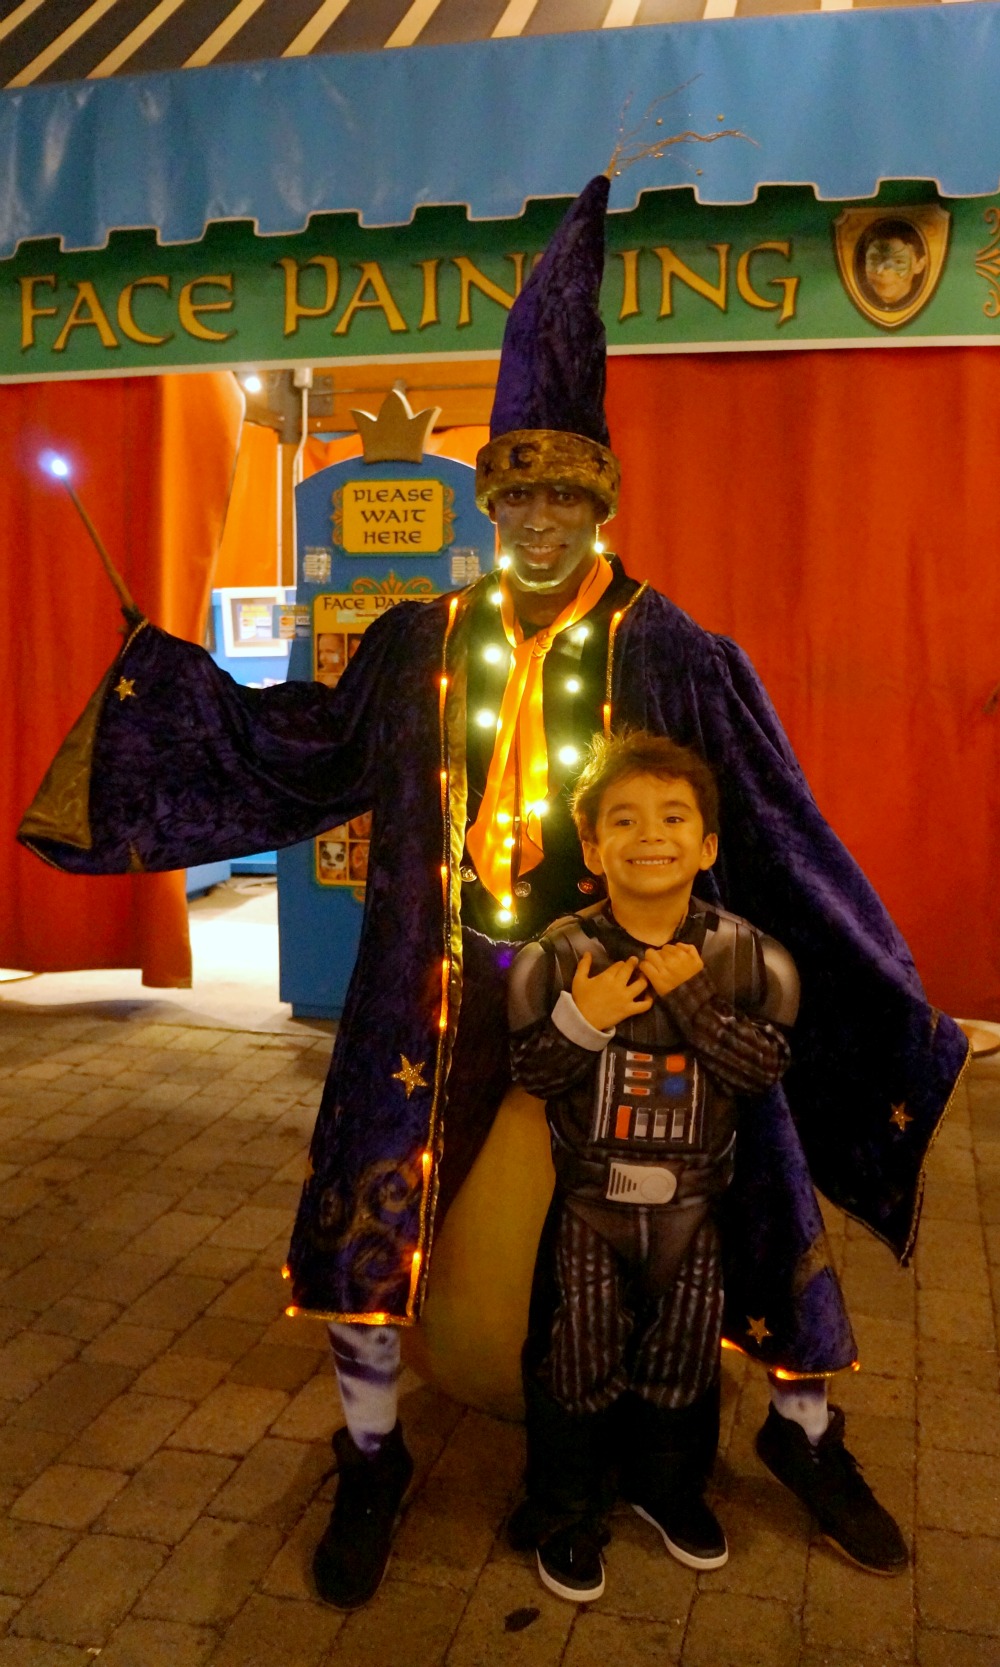 Wizard costumed character